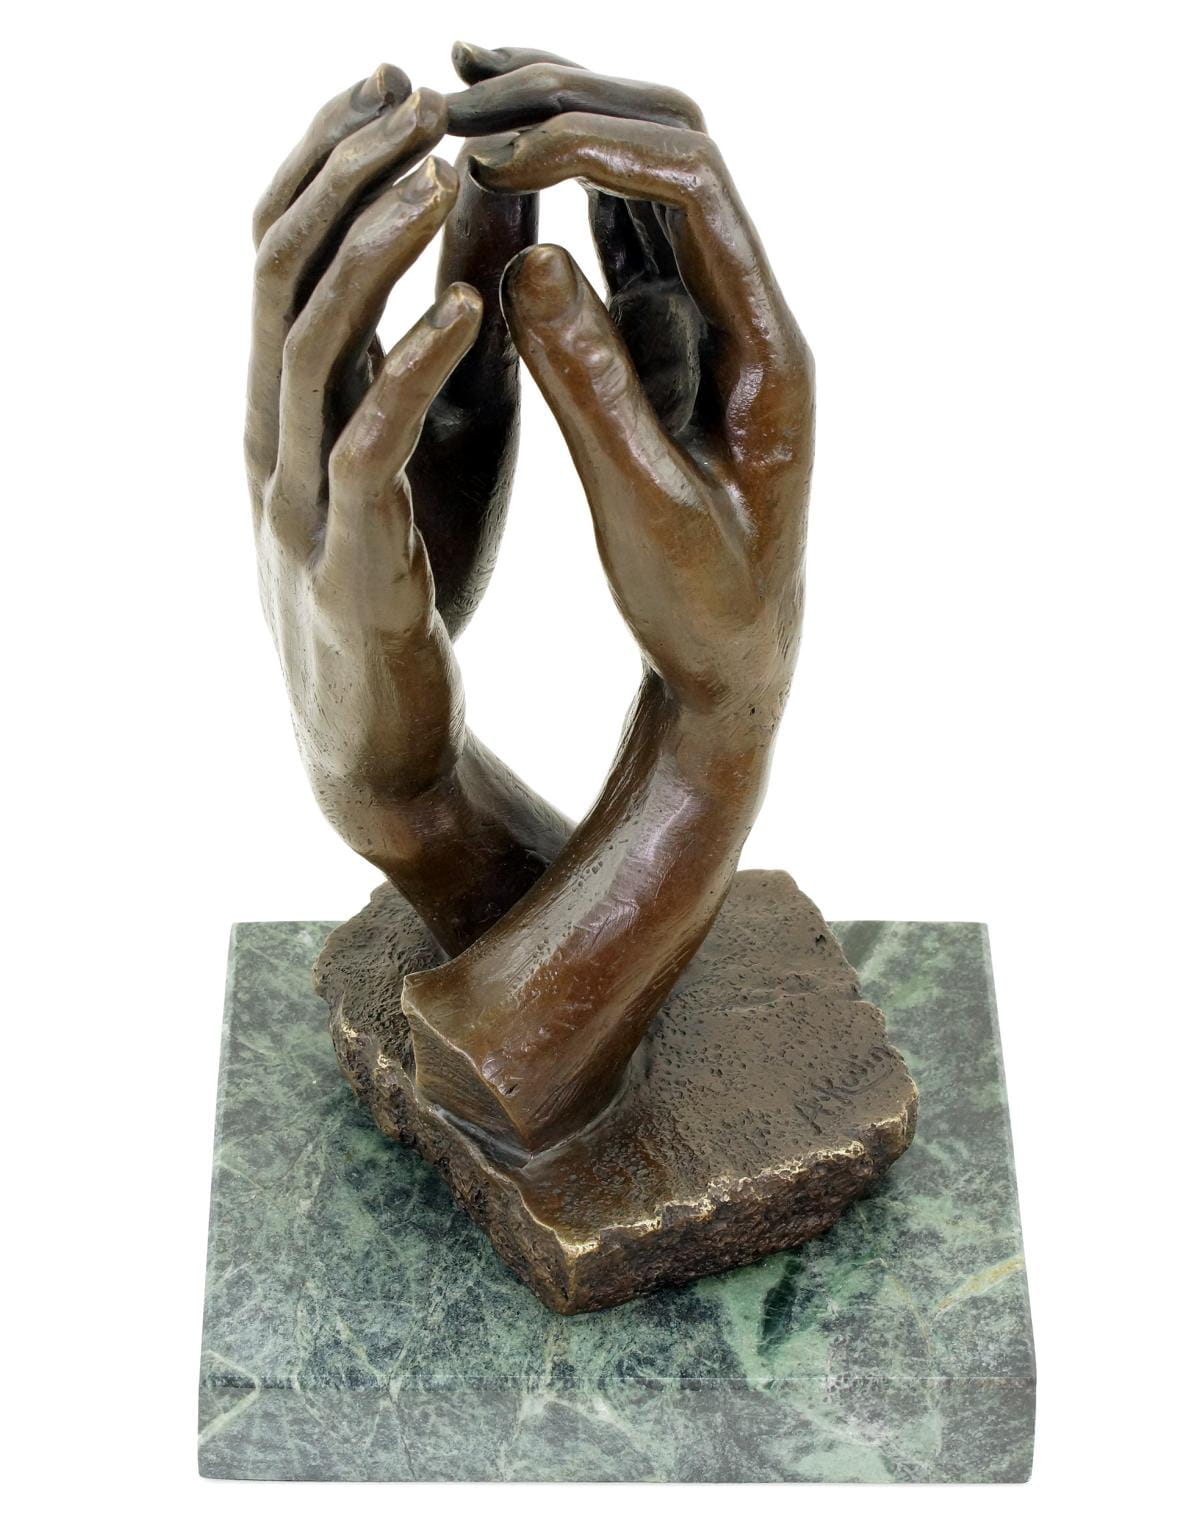 Hands by Rodin